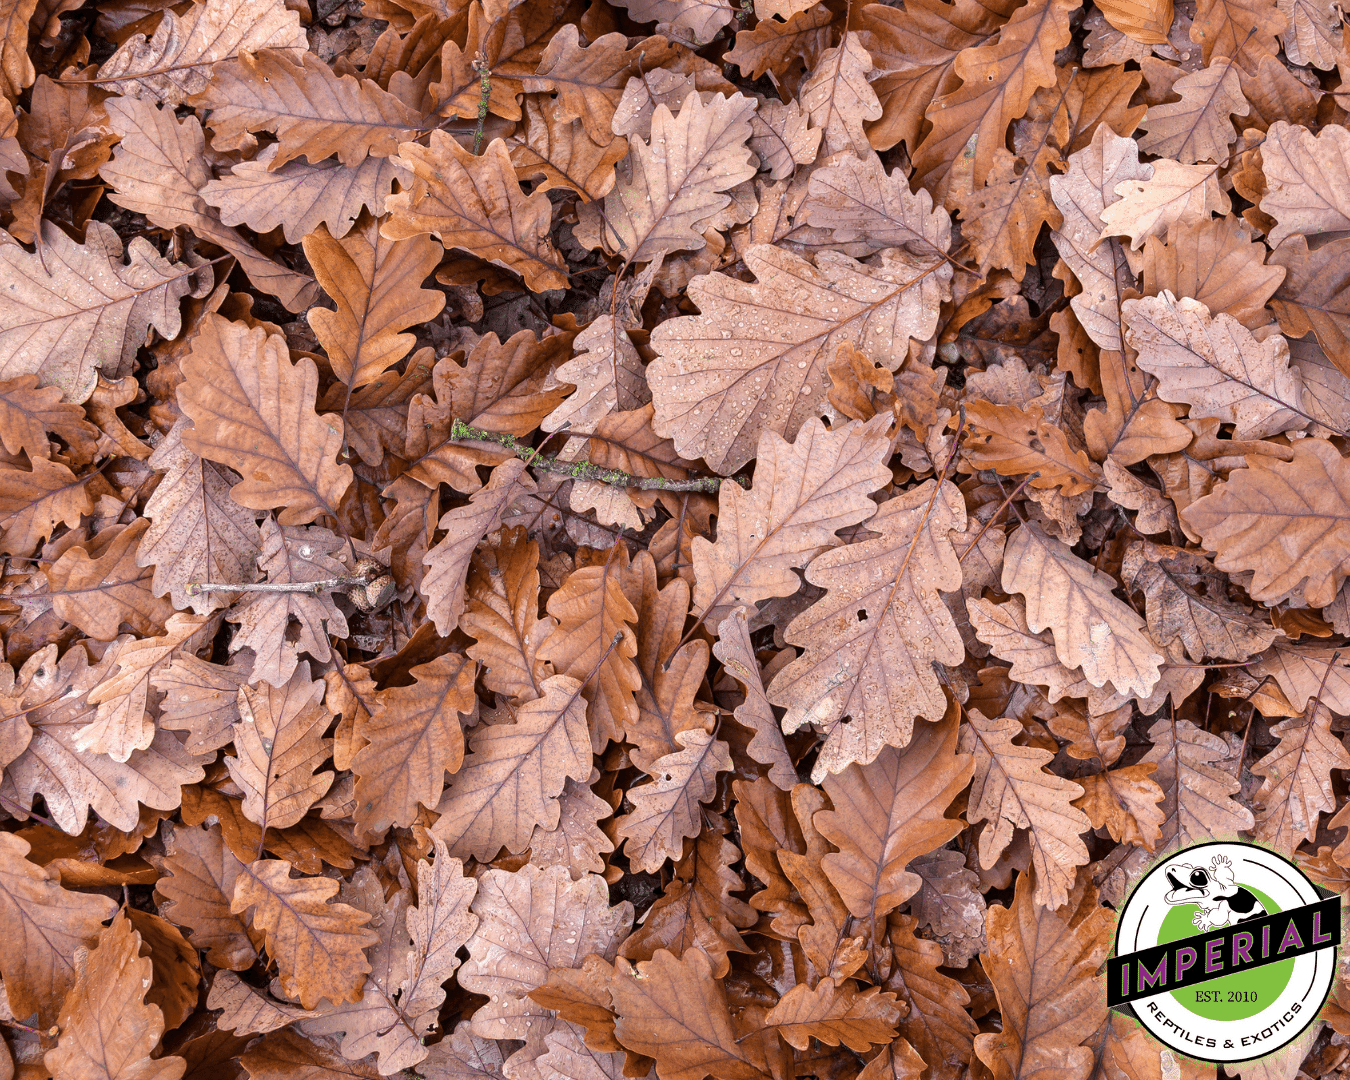 Oak Leaf litter Substrate for sale online at cheap prices. ABG mix is important for vivariums and reptile enclosures.